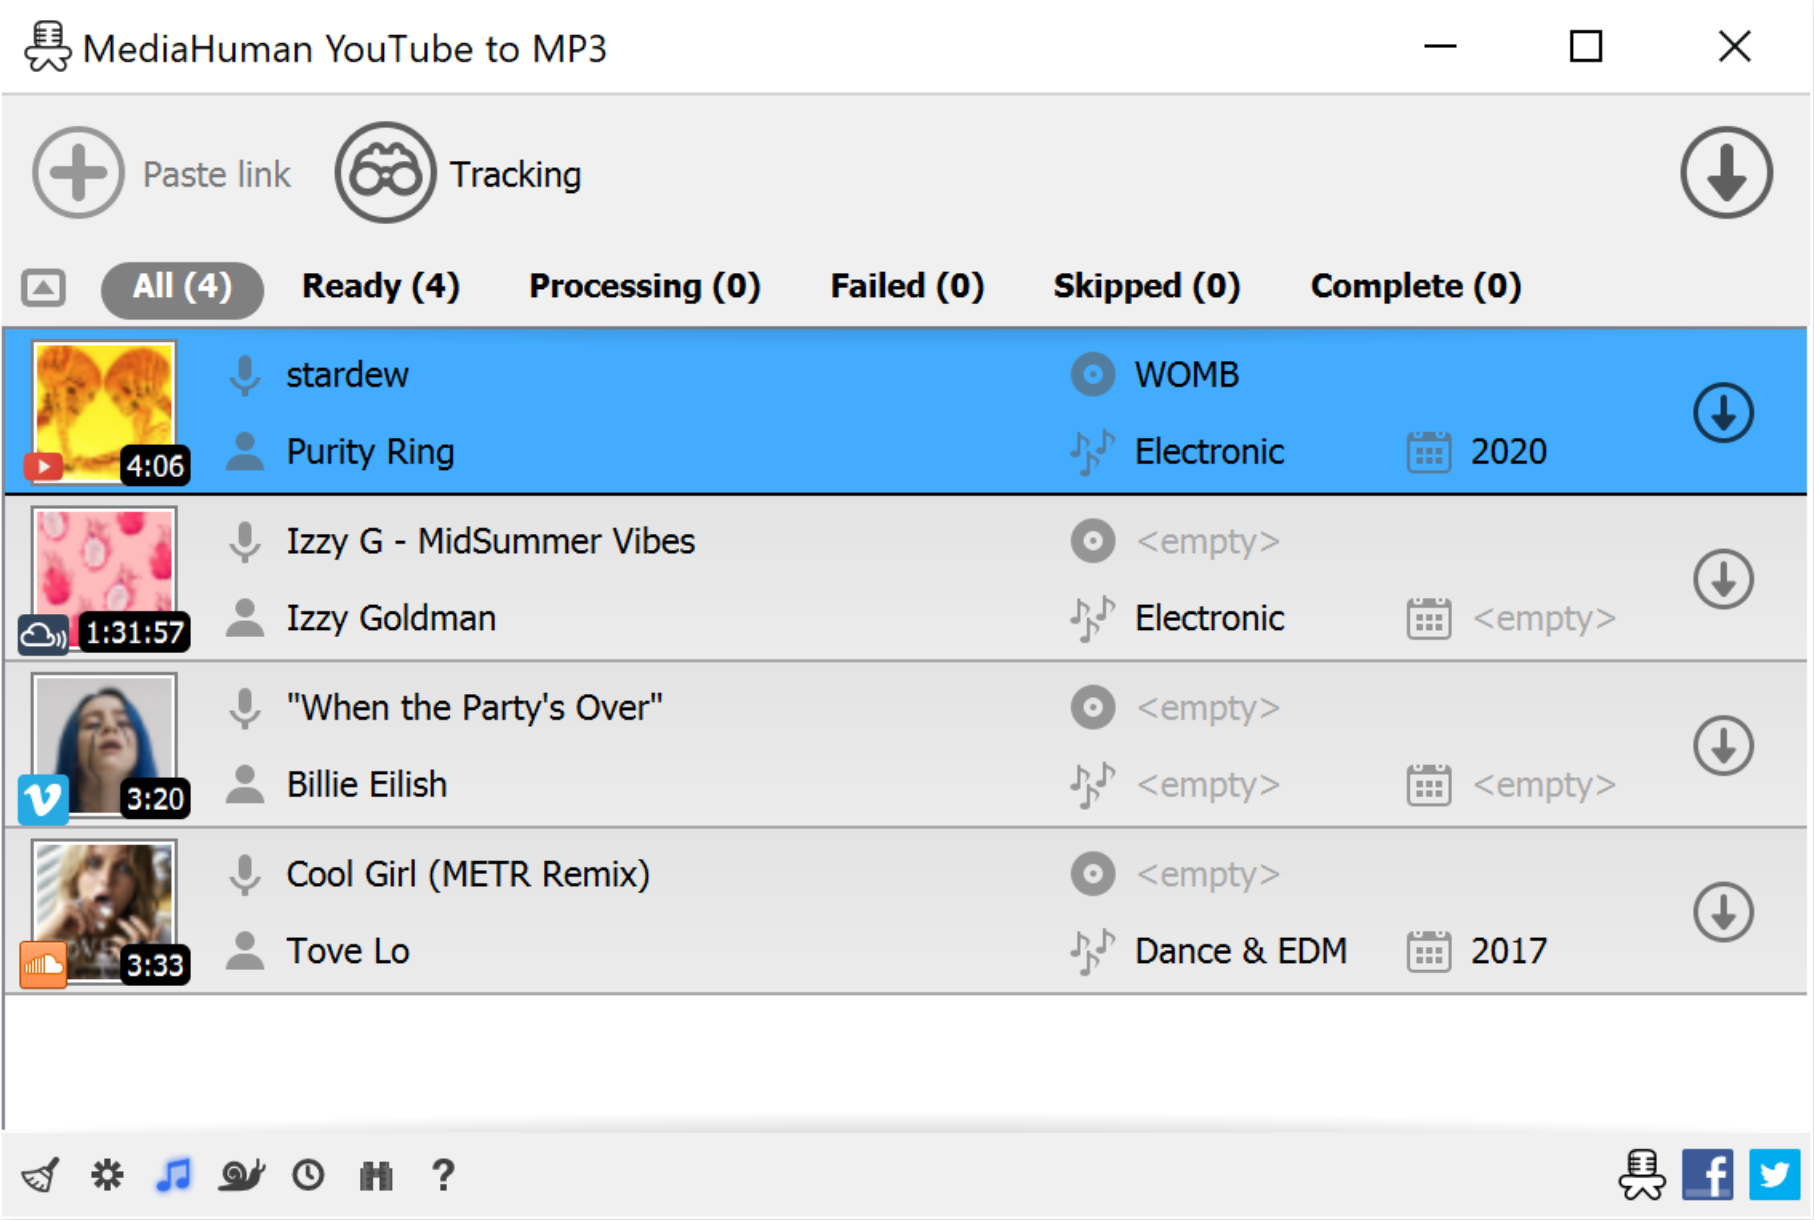 convert youtube to mp3 free download